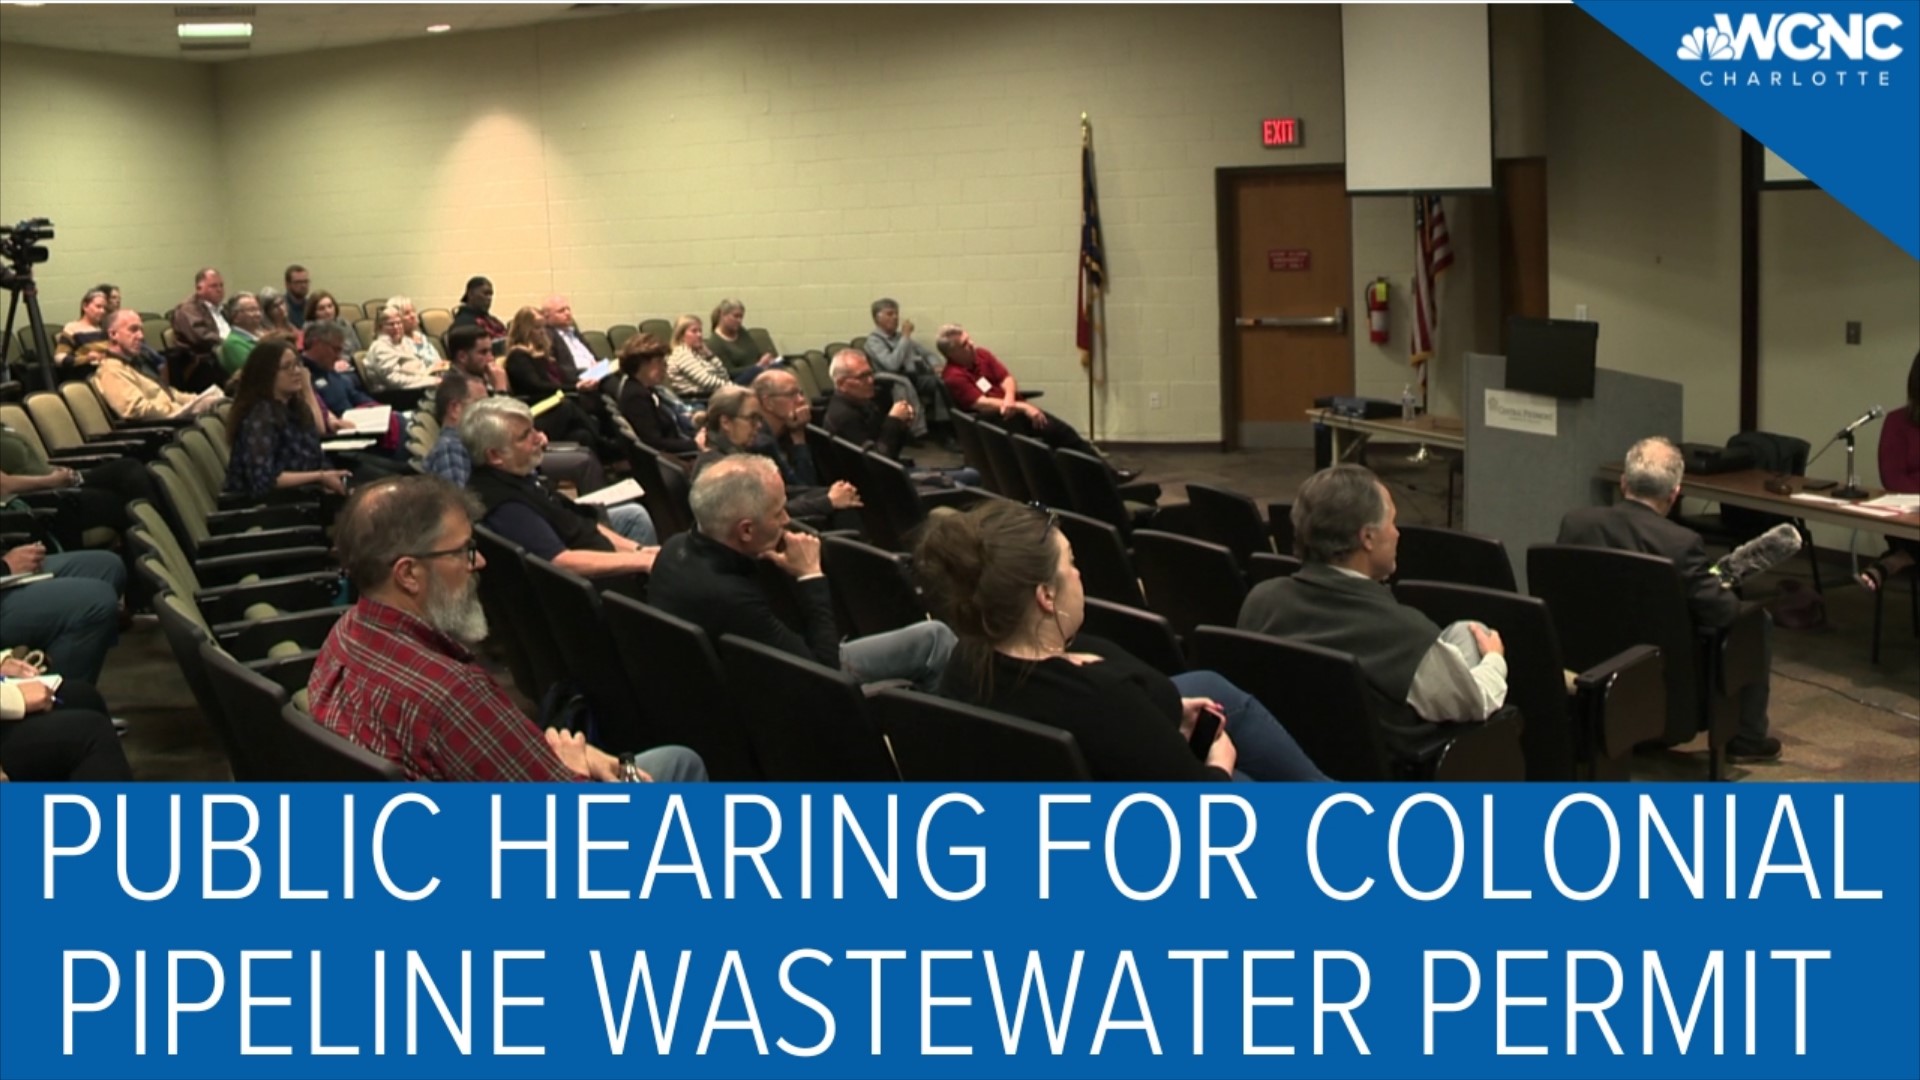 The permit would allow polluted groundwater to be treated in Huntersville and discharged into North Prong Clark Creek in the Yadkin-Pee Dee River basin.